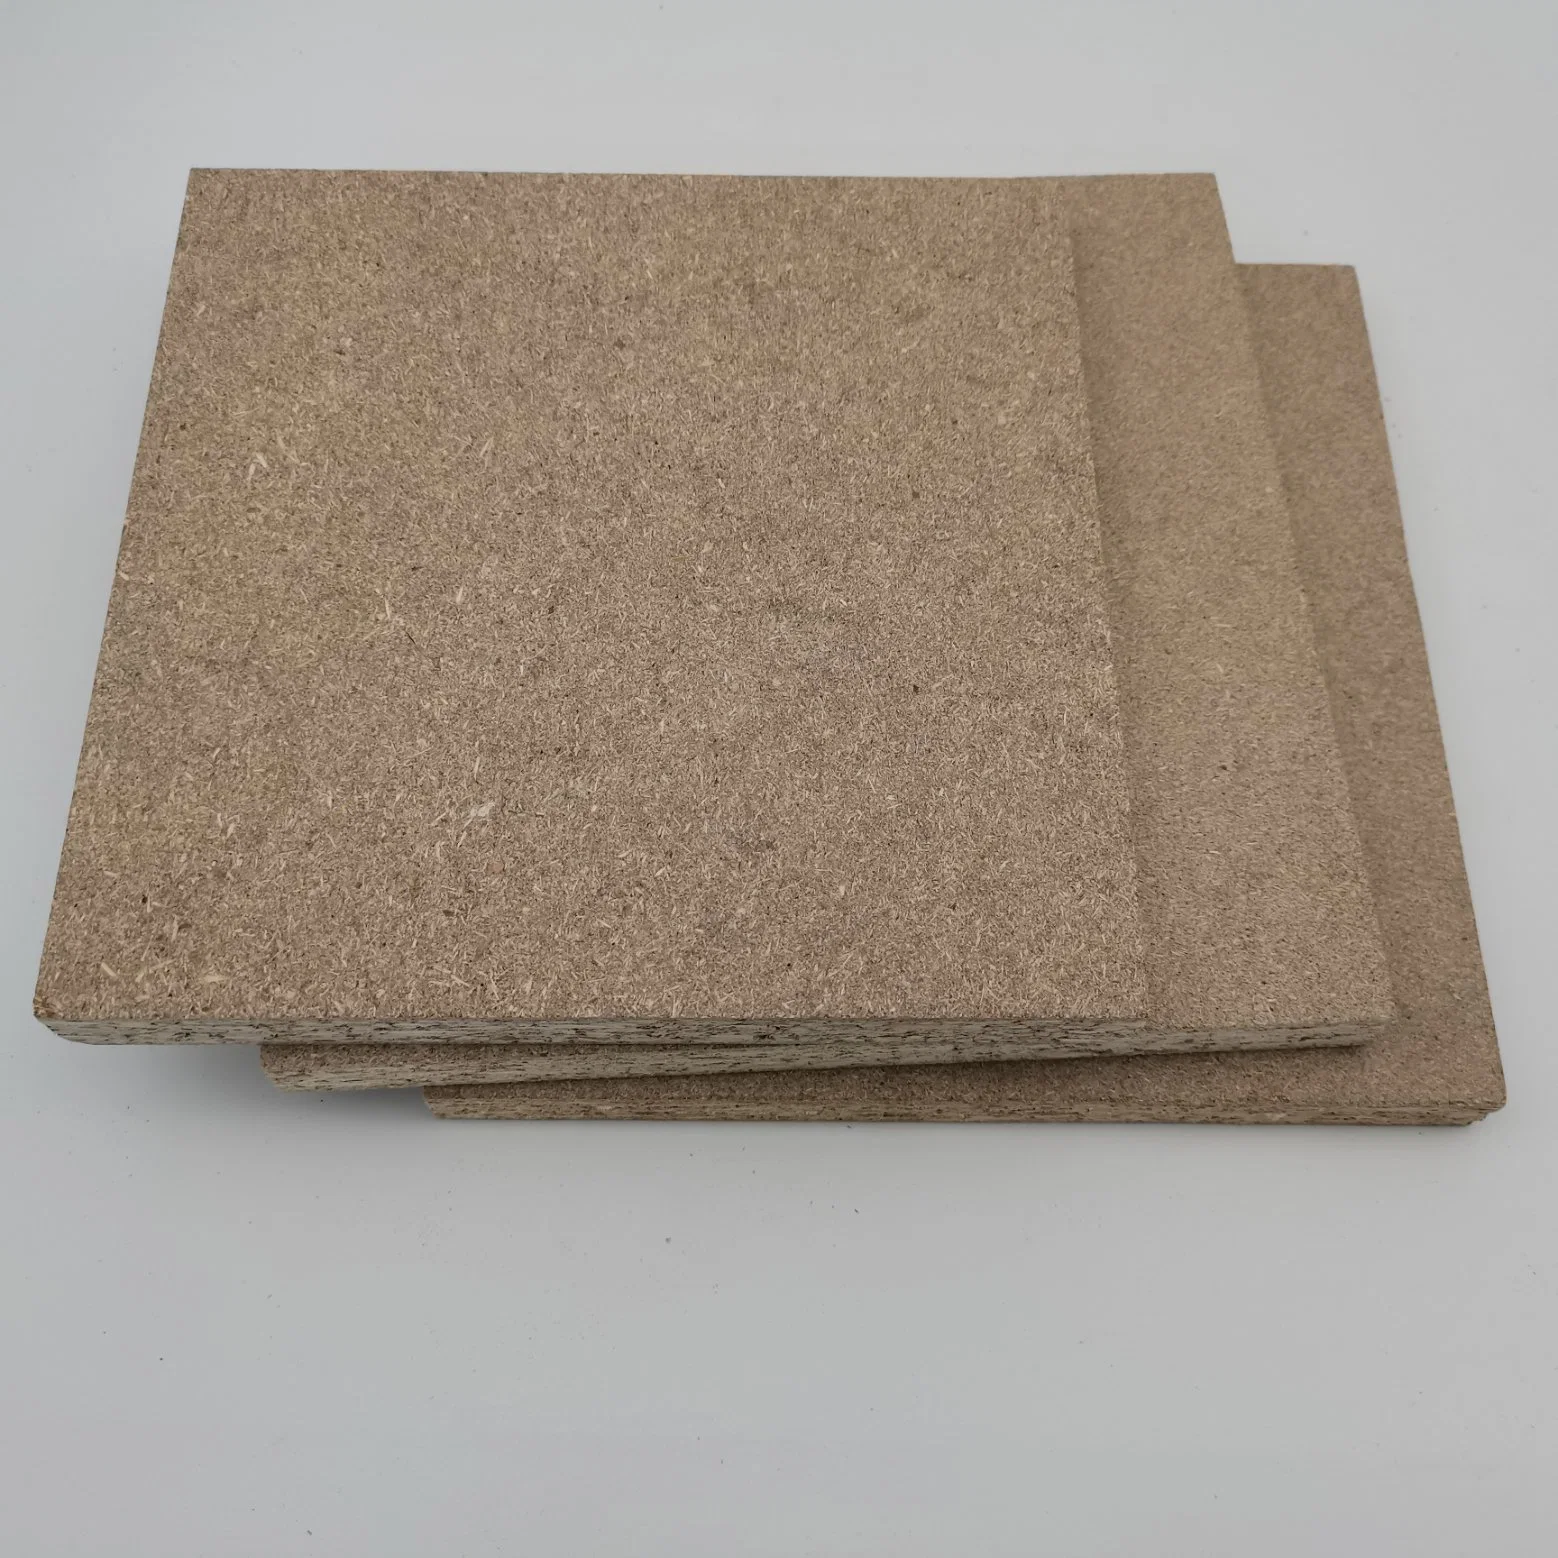 6-25mm Melamine Faced Particle Board for Furniture and Building